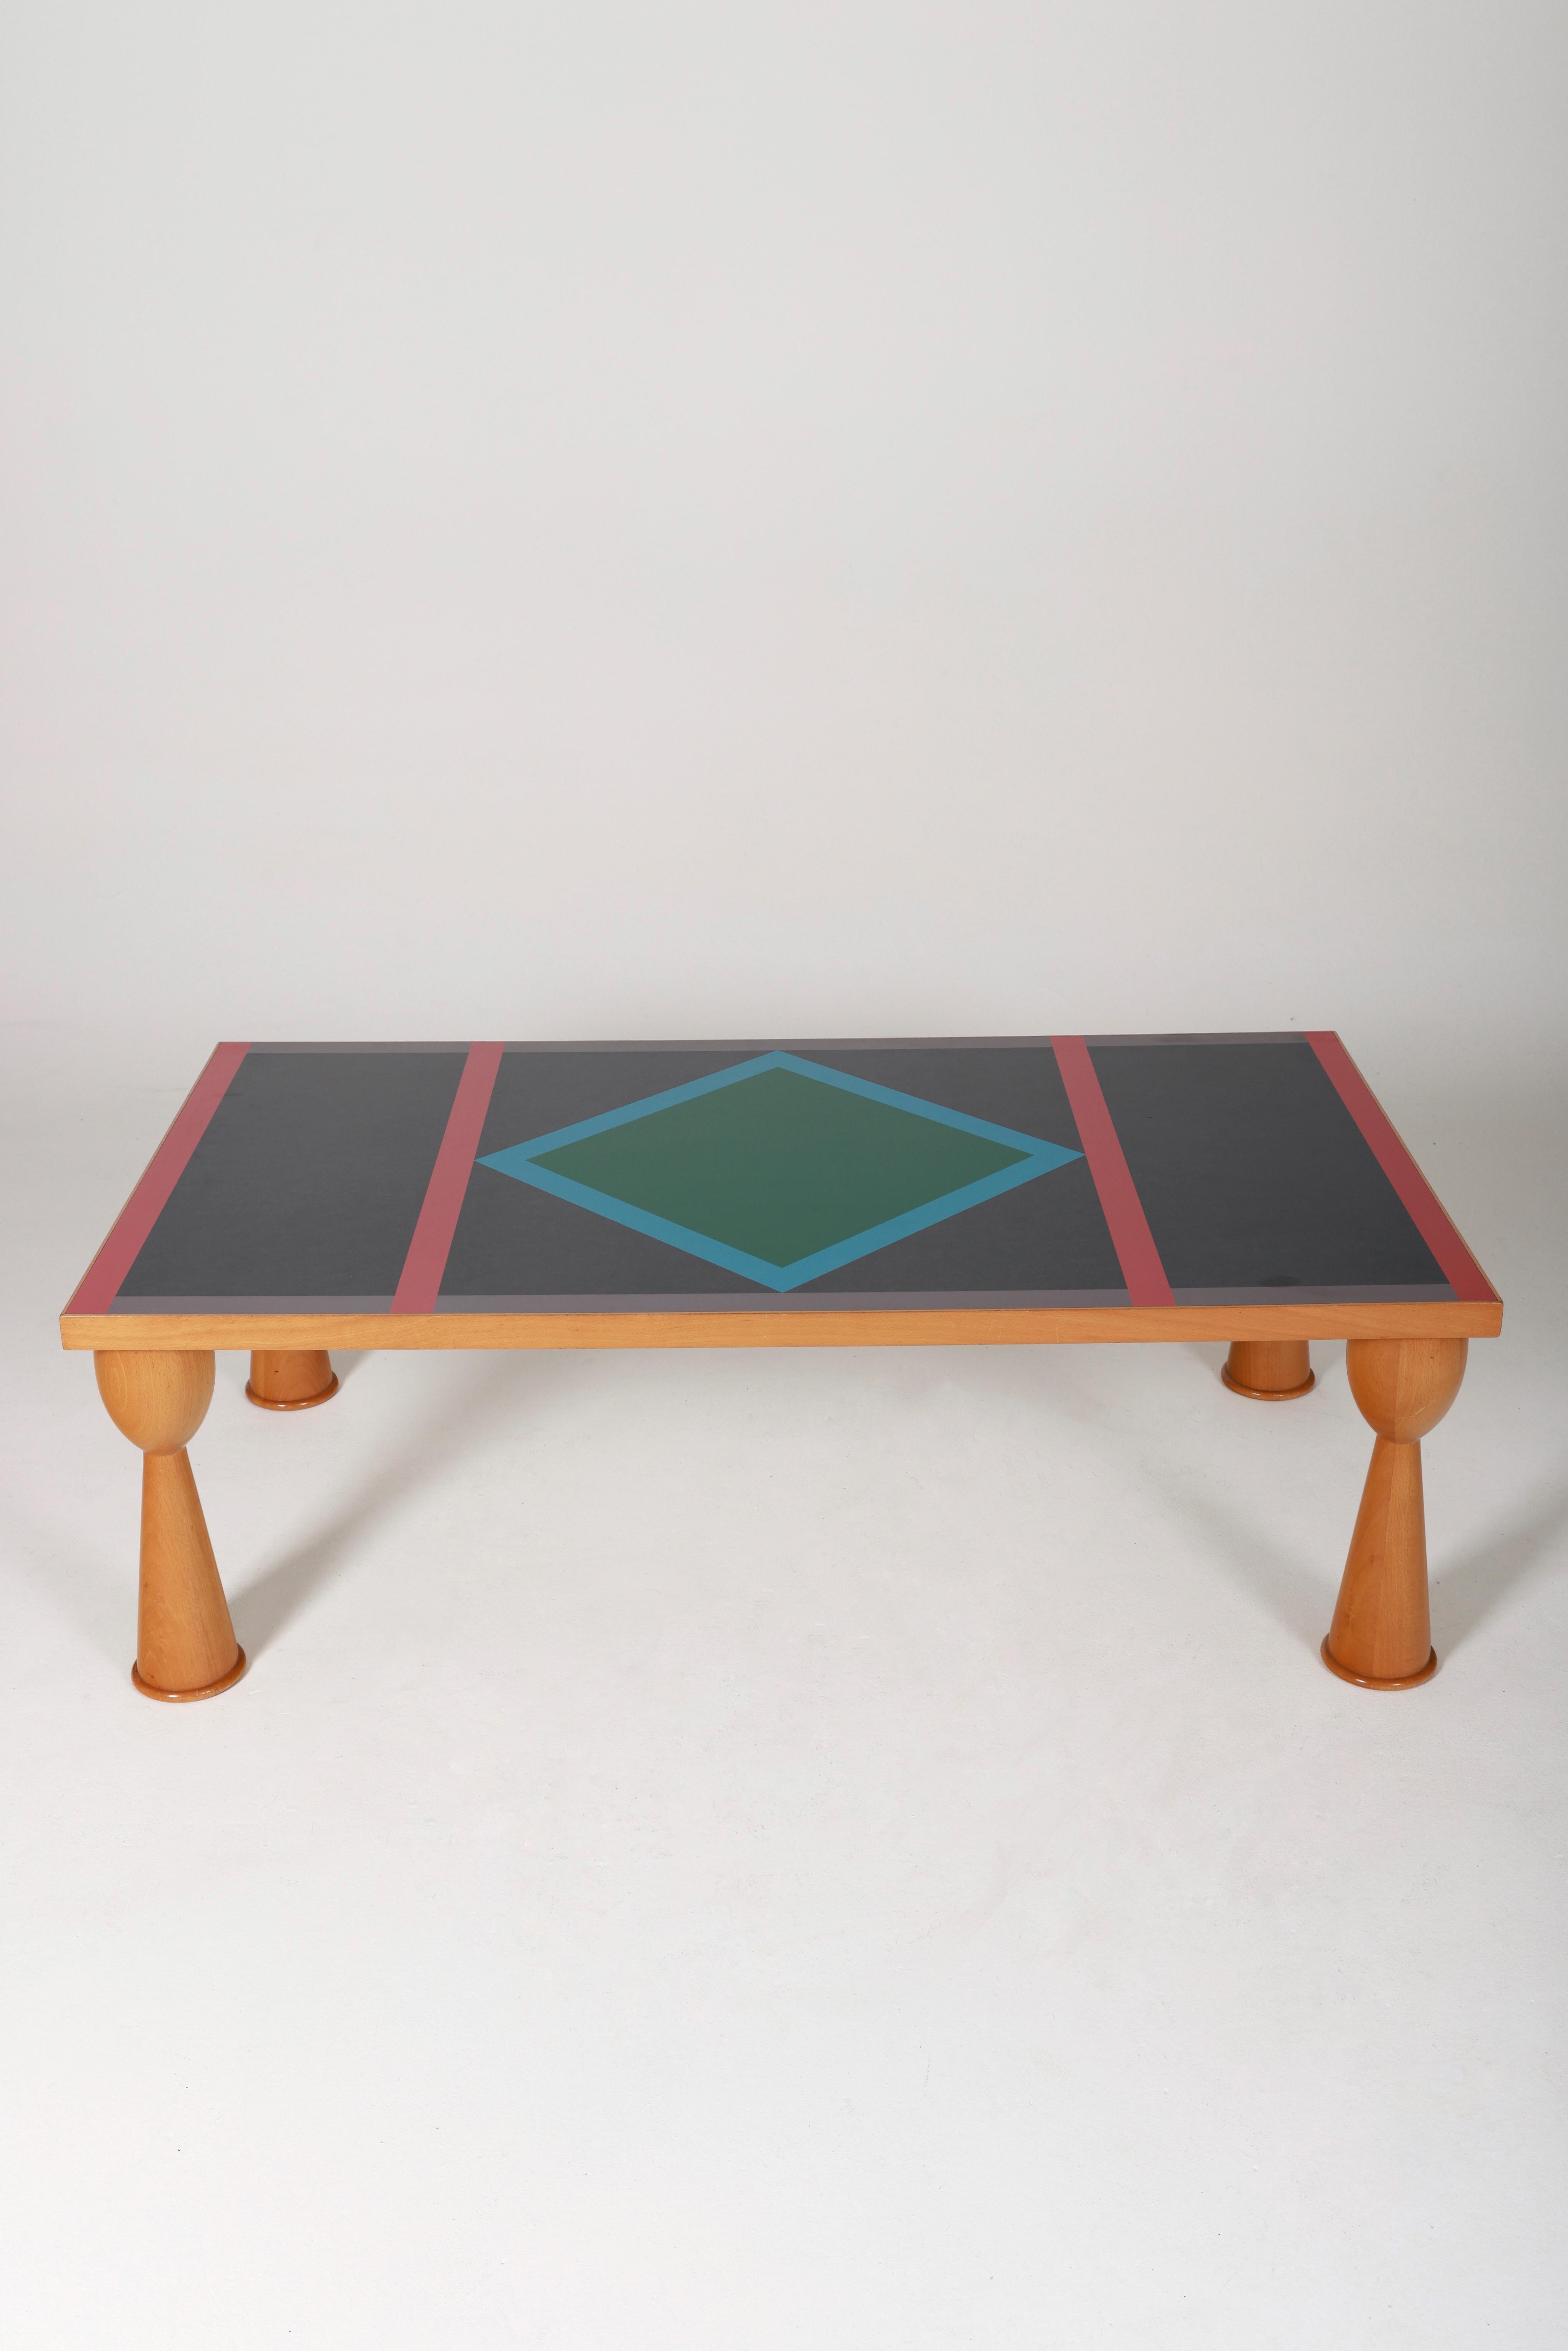 Alicudi coffee table by the designer Ettore Sottsass (1917-2007) and Marco Zanini for the publisher Zanotta, from the 1990s. Wooden table with polychrome geometric patterns. In very good condition.
LP926